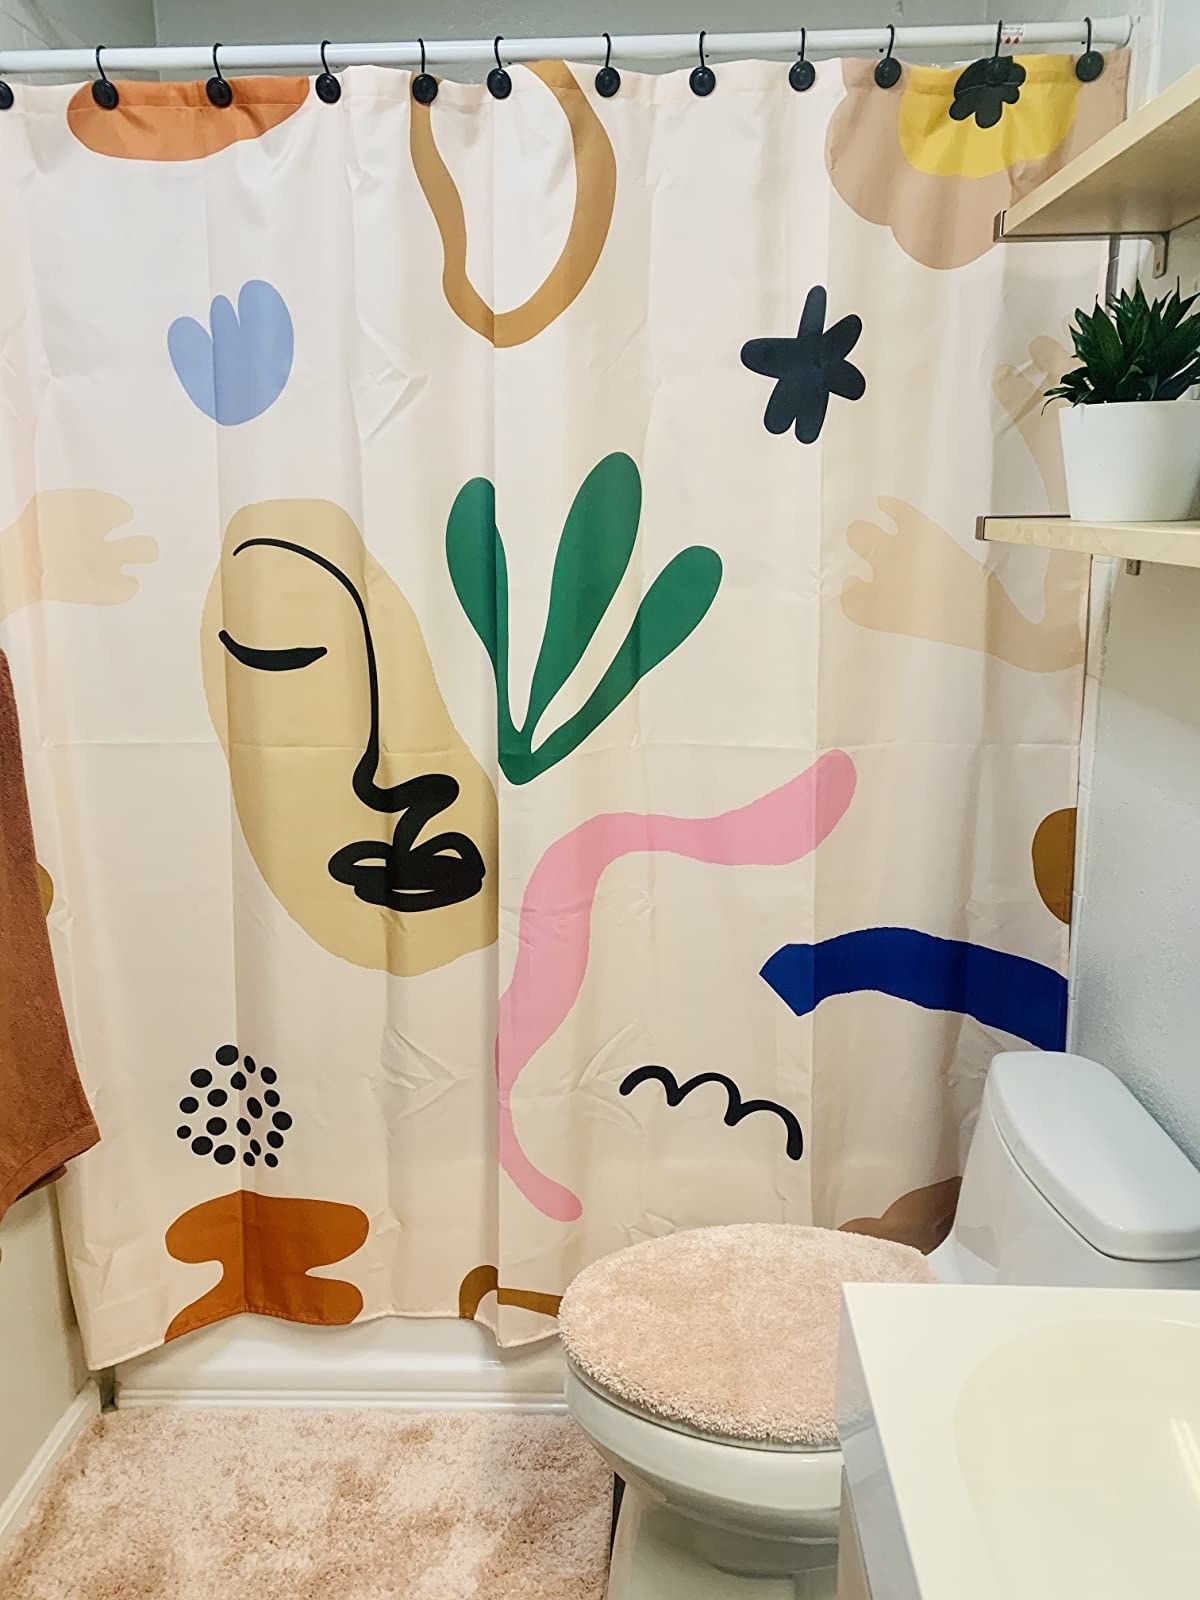 a reviewer photo of the abstract shower curtain that has fun shapes and squiggles in different colors and an abstract drawing of a face